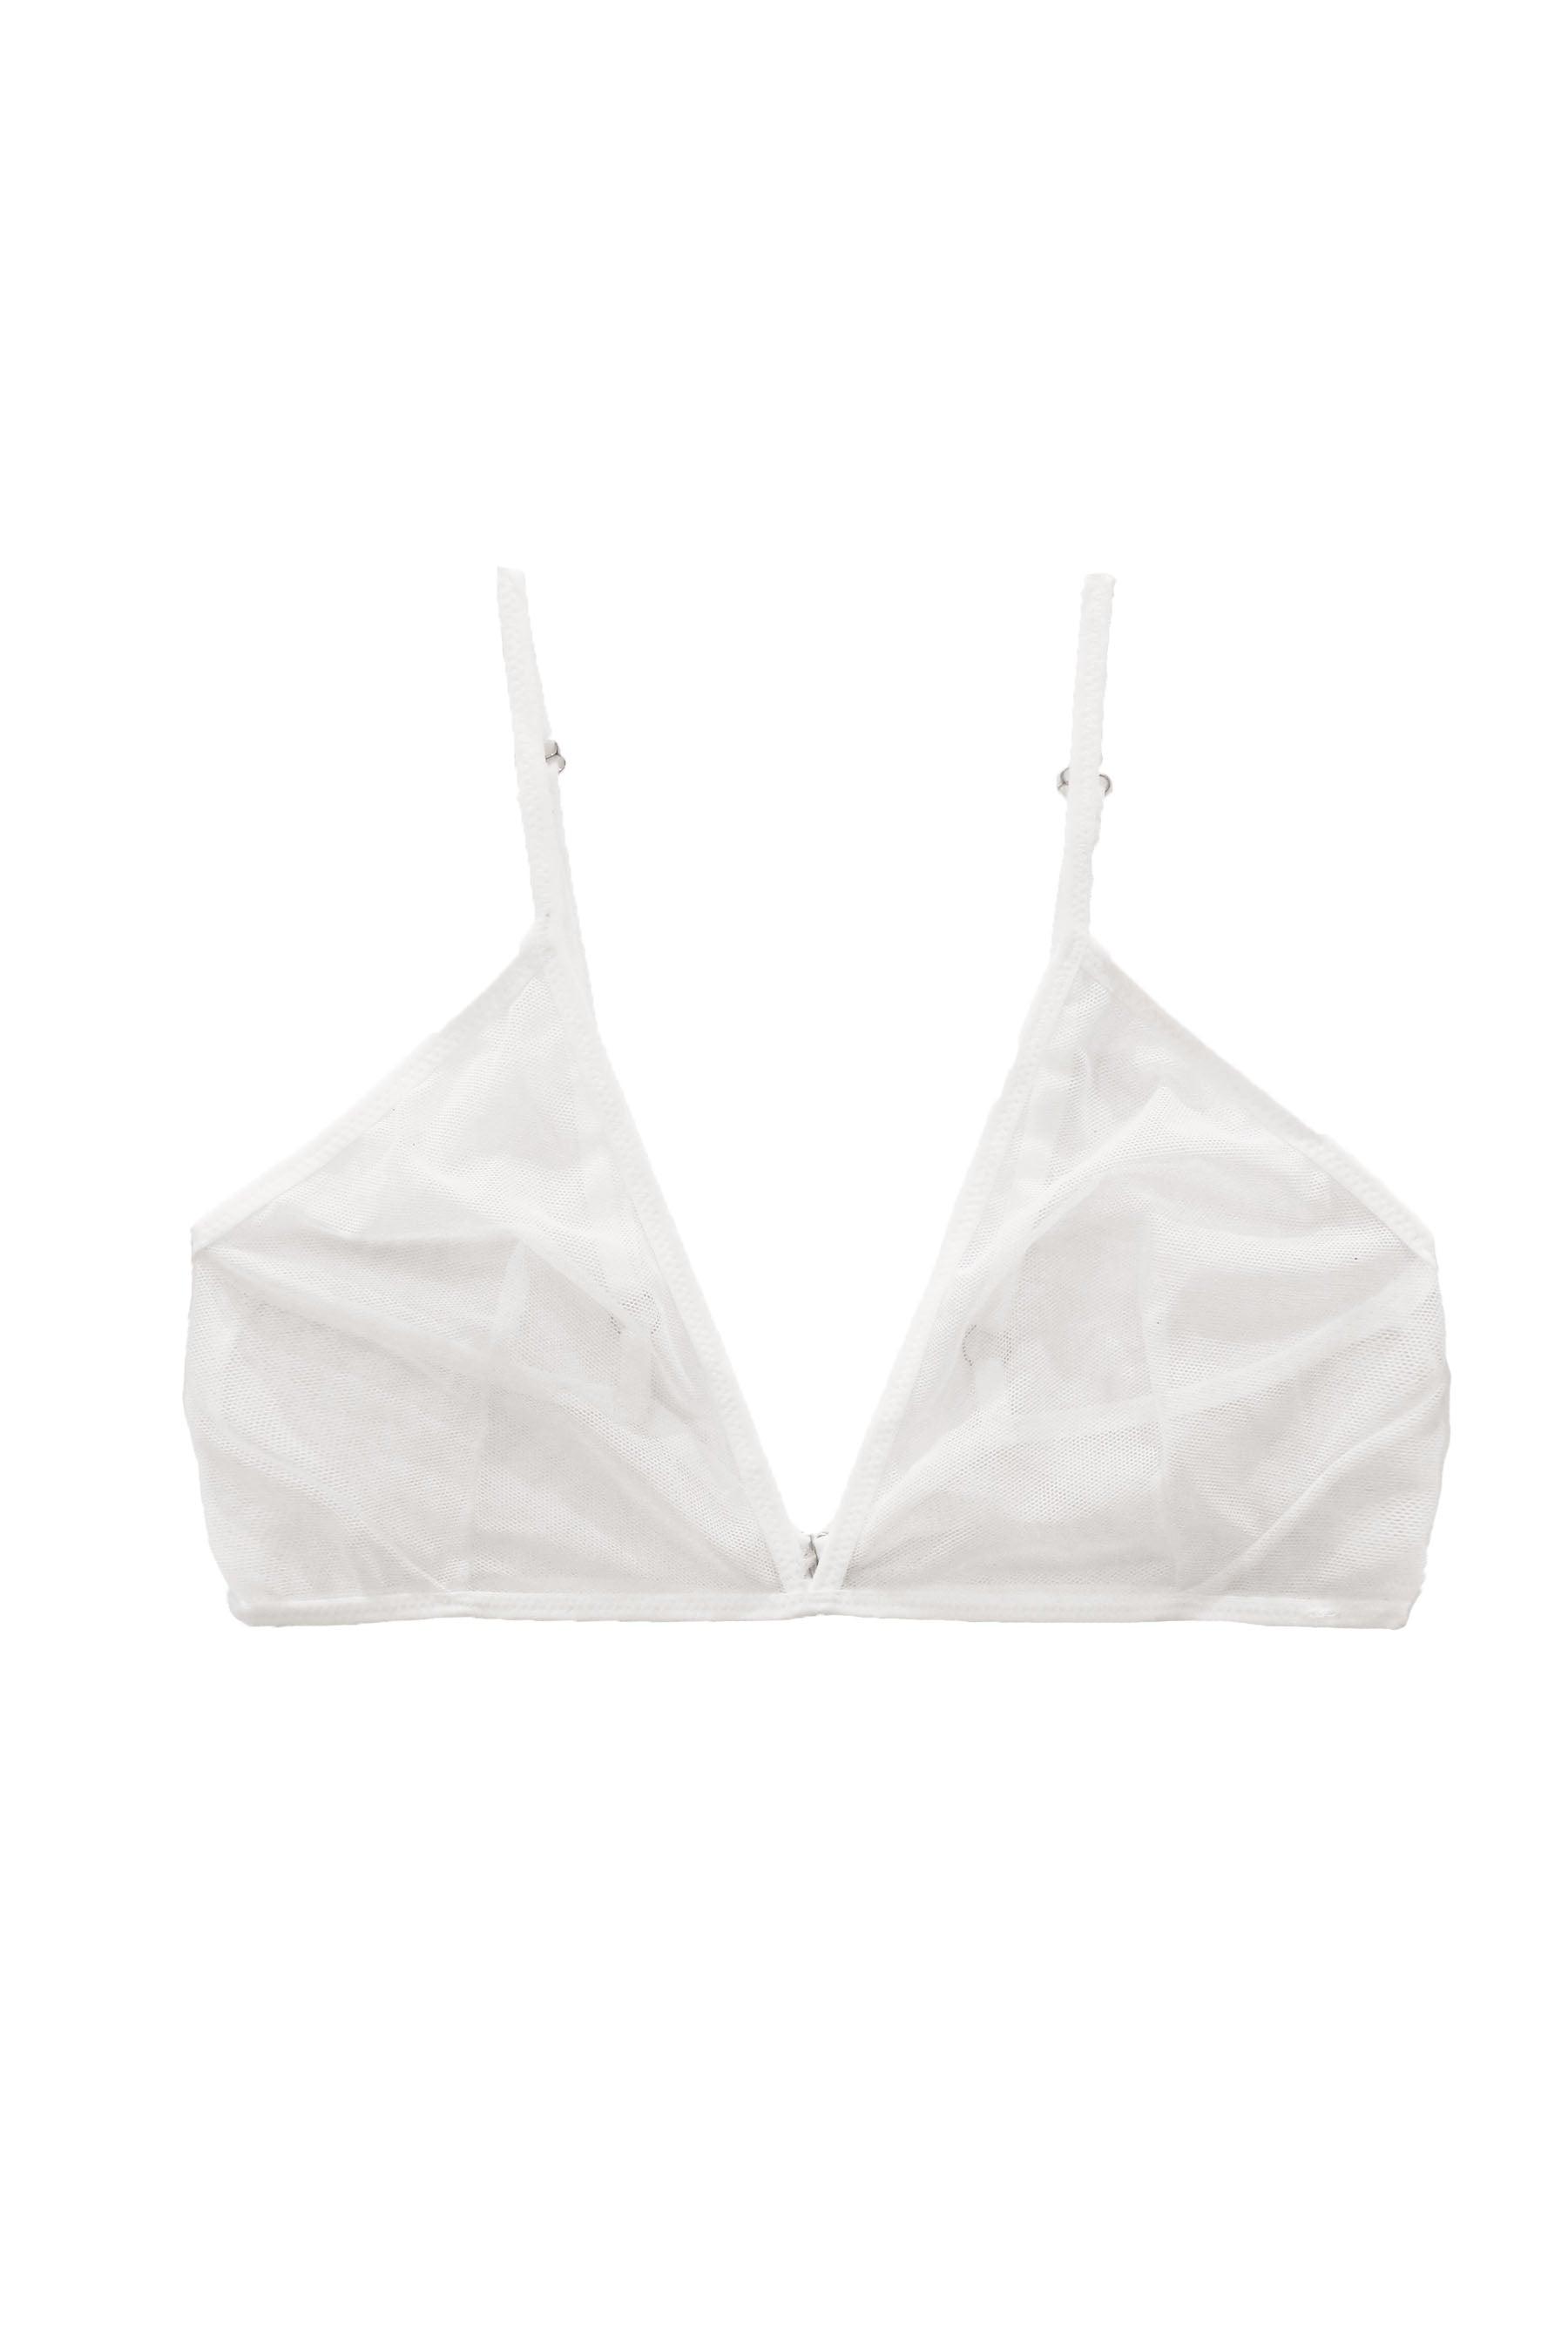 Georgie Bra in White - MARY YOUNG